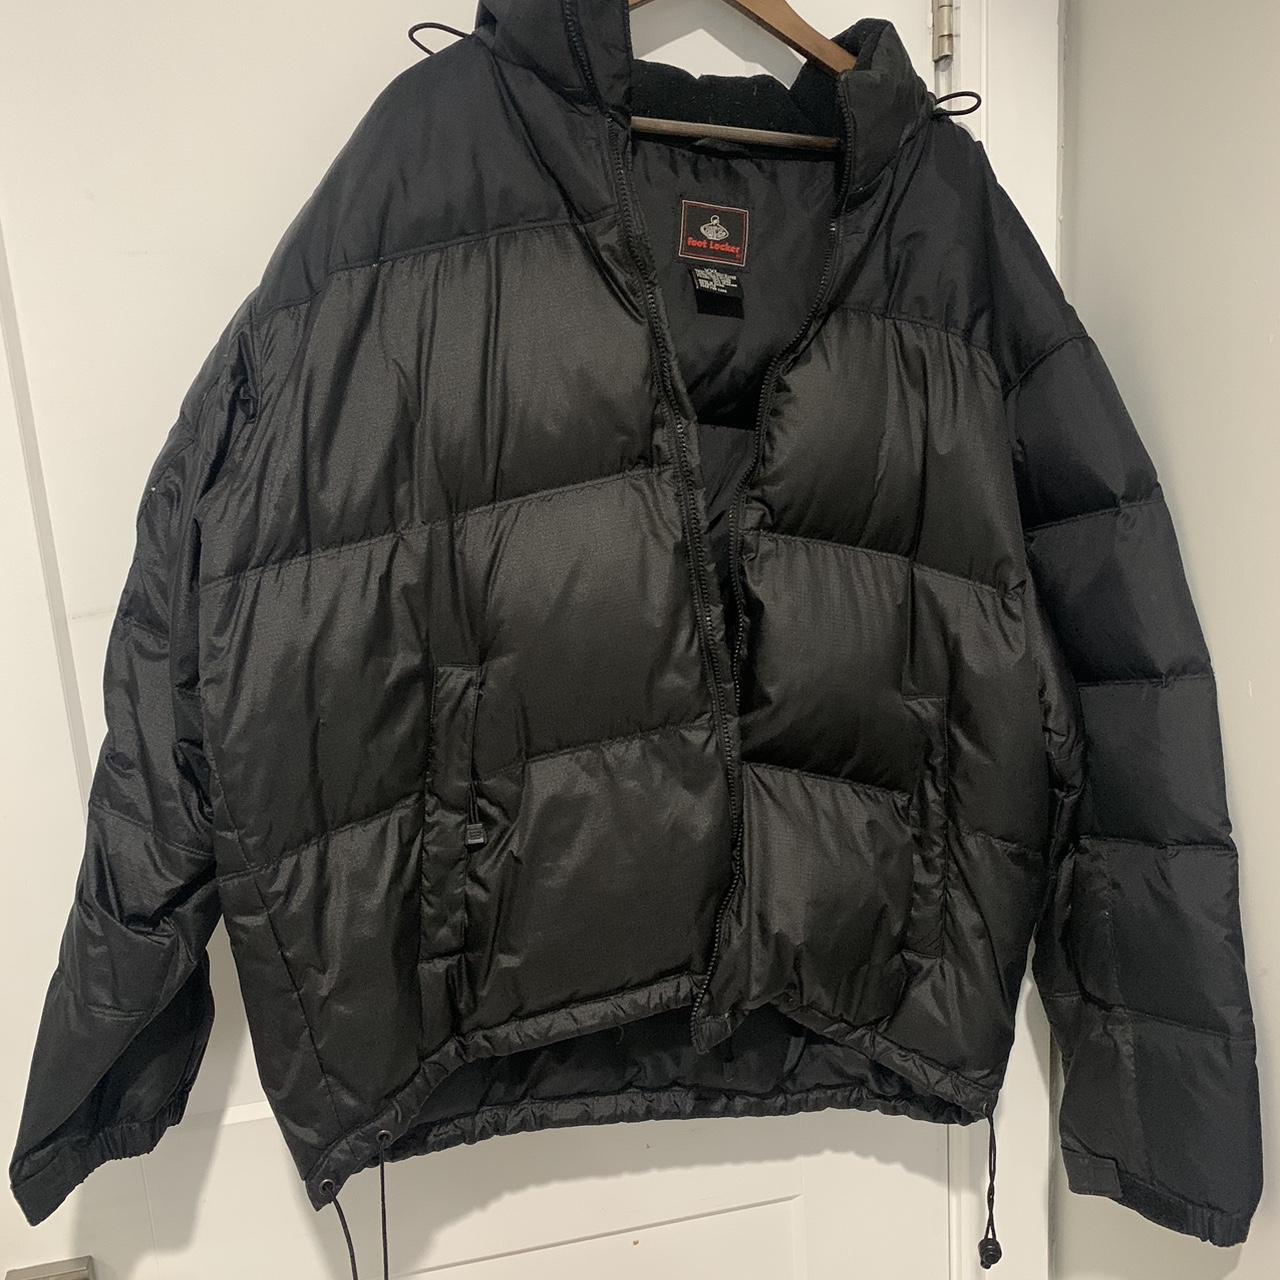 Black Puffer jacket that’s great for the winter - Depop